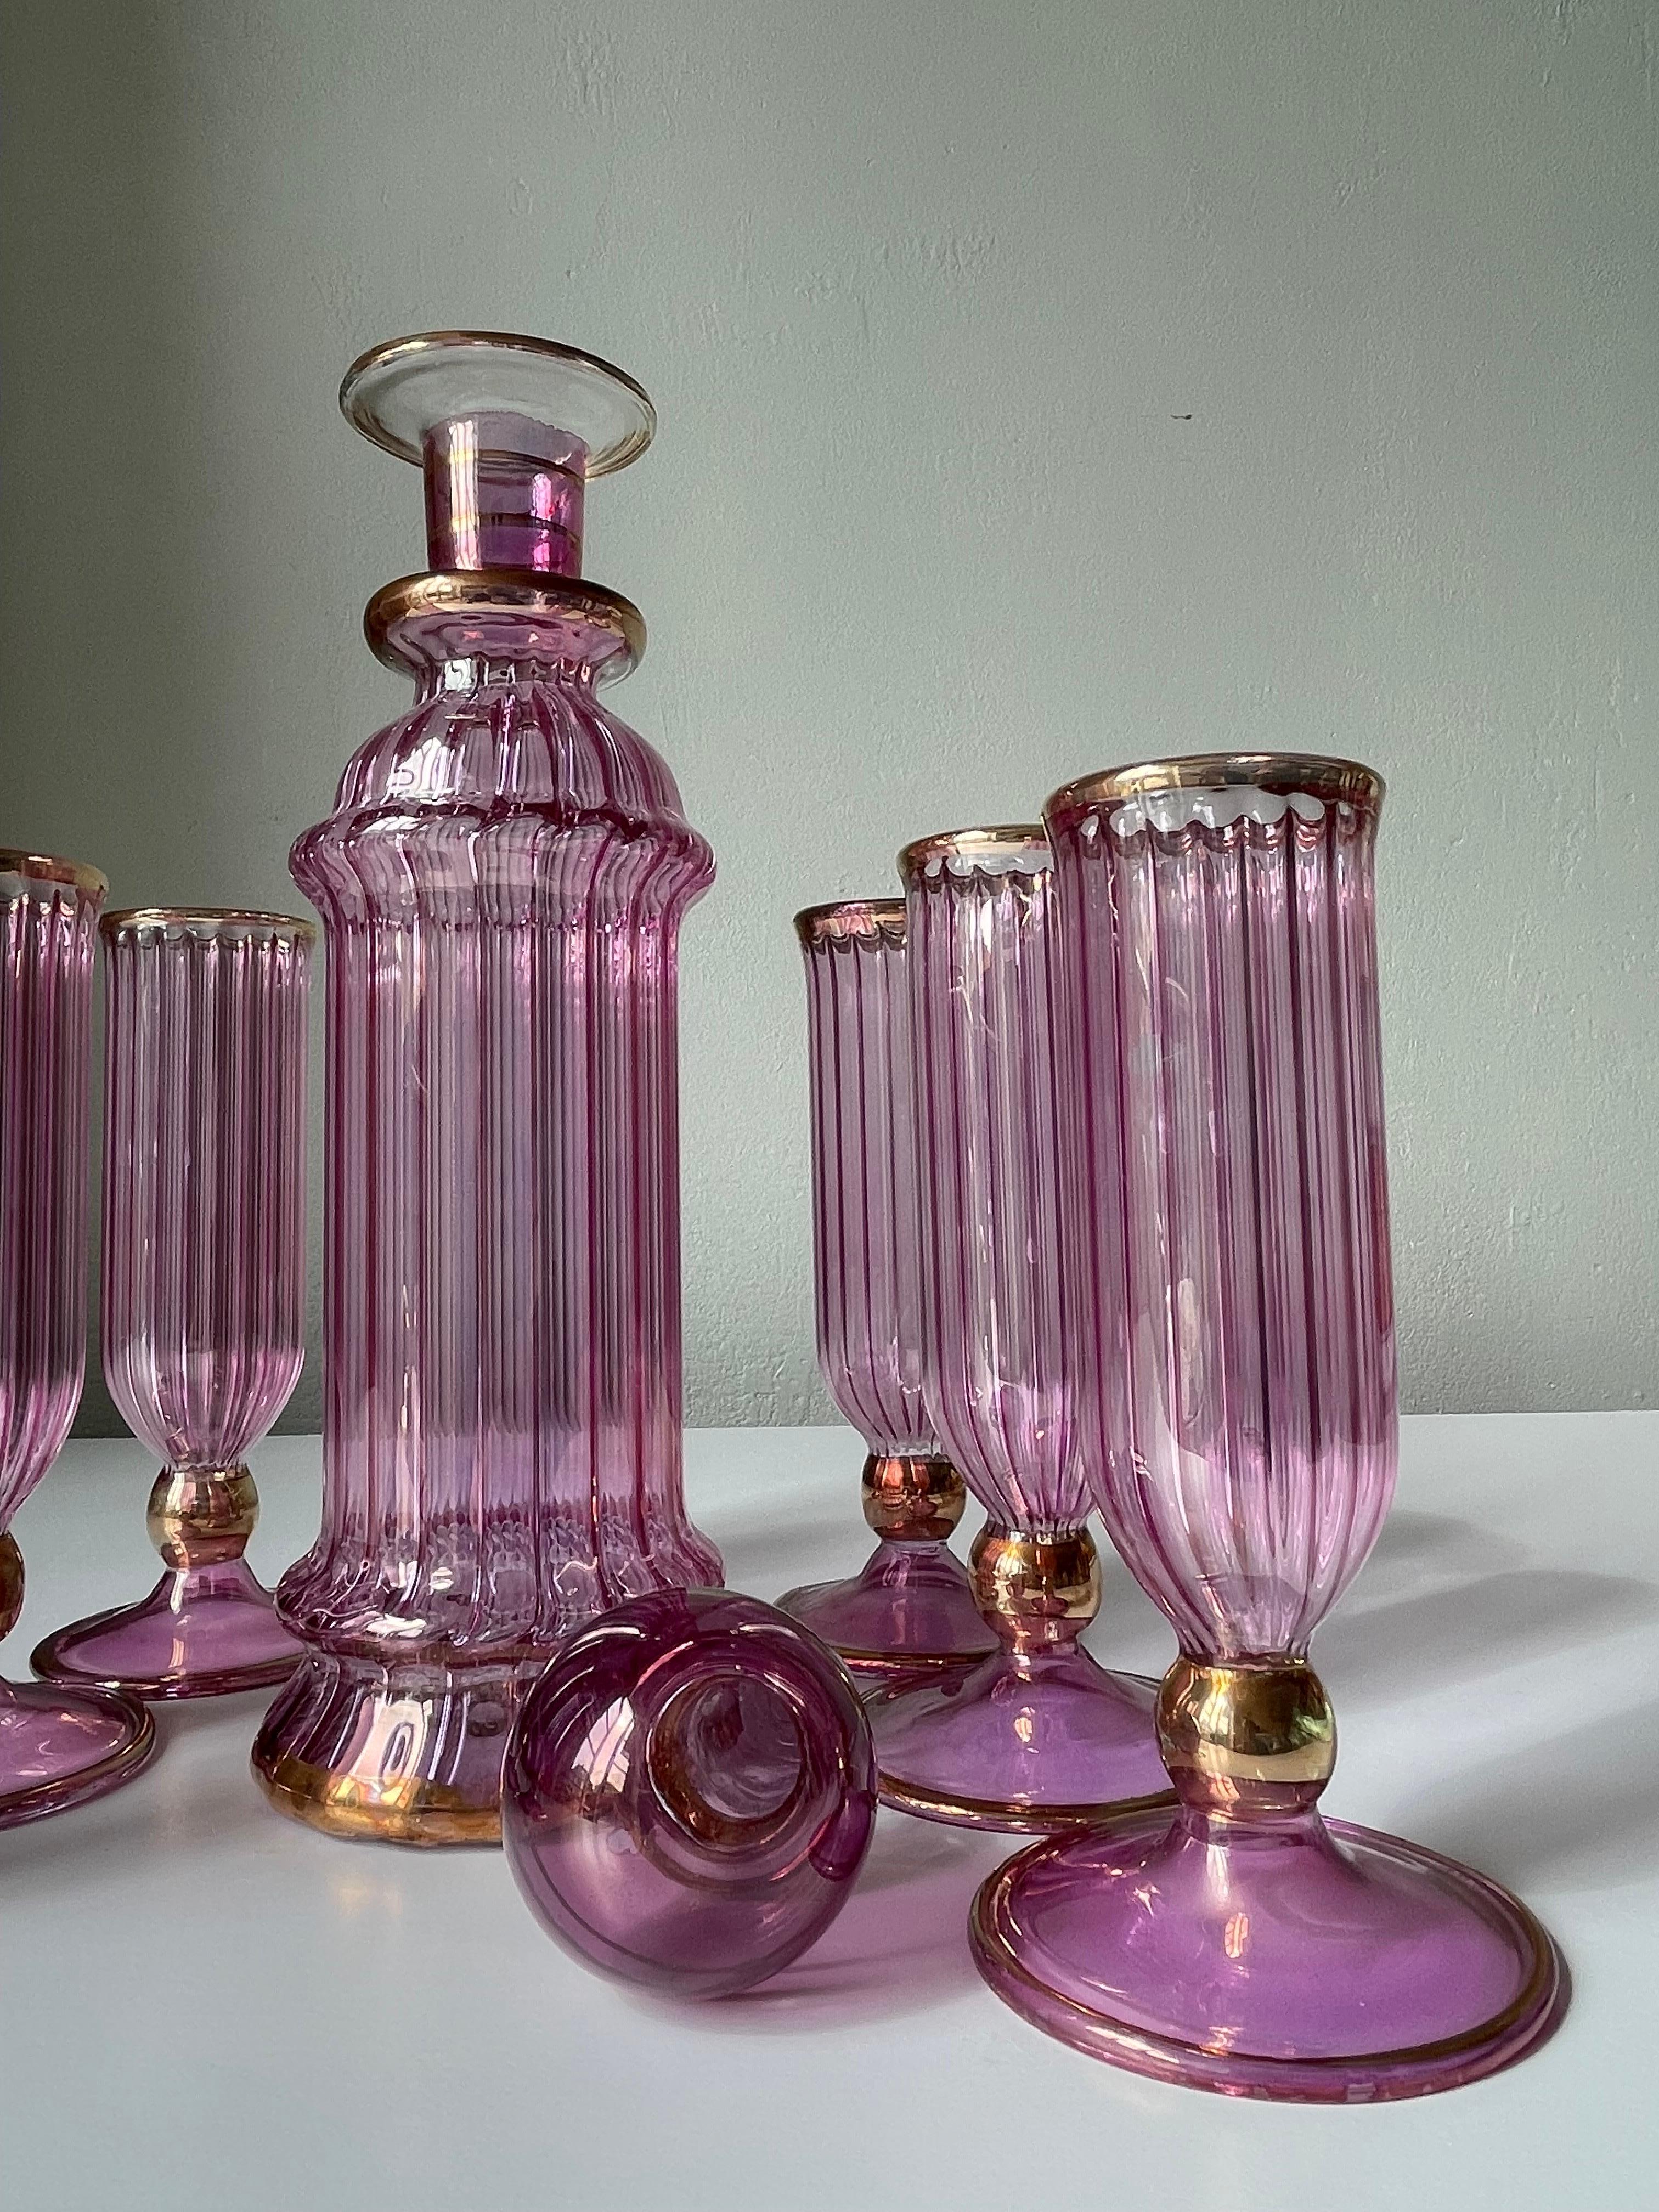 1950s Italian Murano Bright Rose Pink Gold Art Glass Serving Set For Sale 4